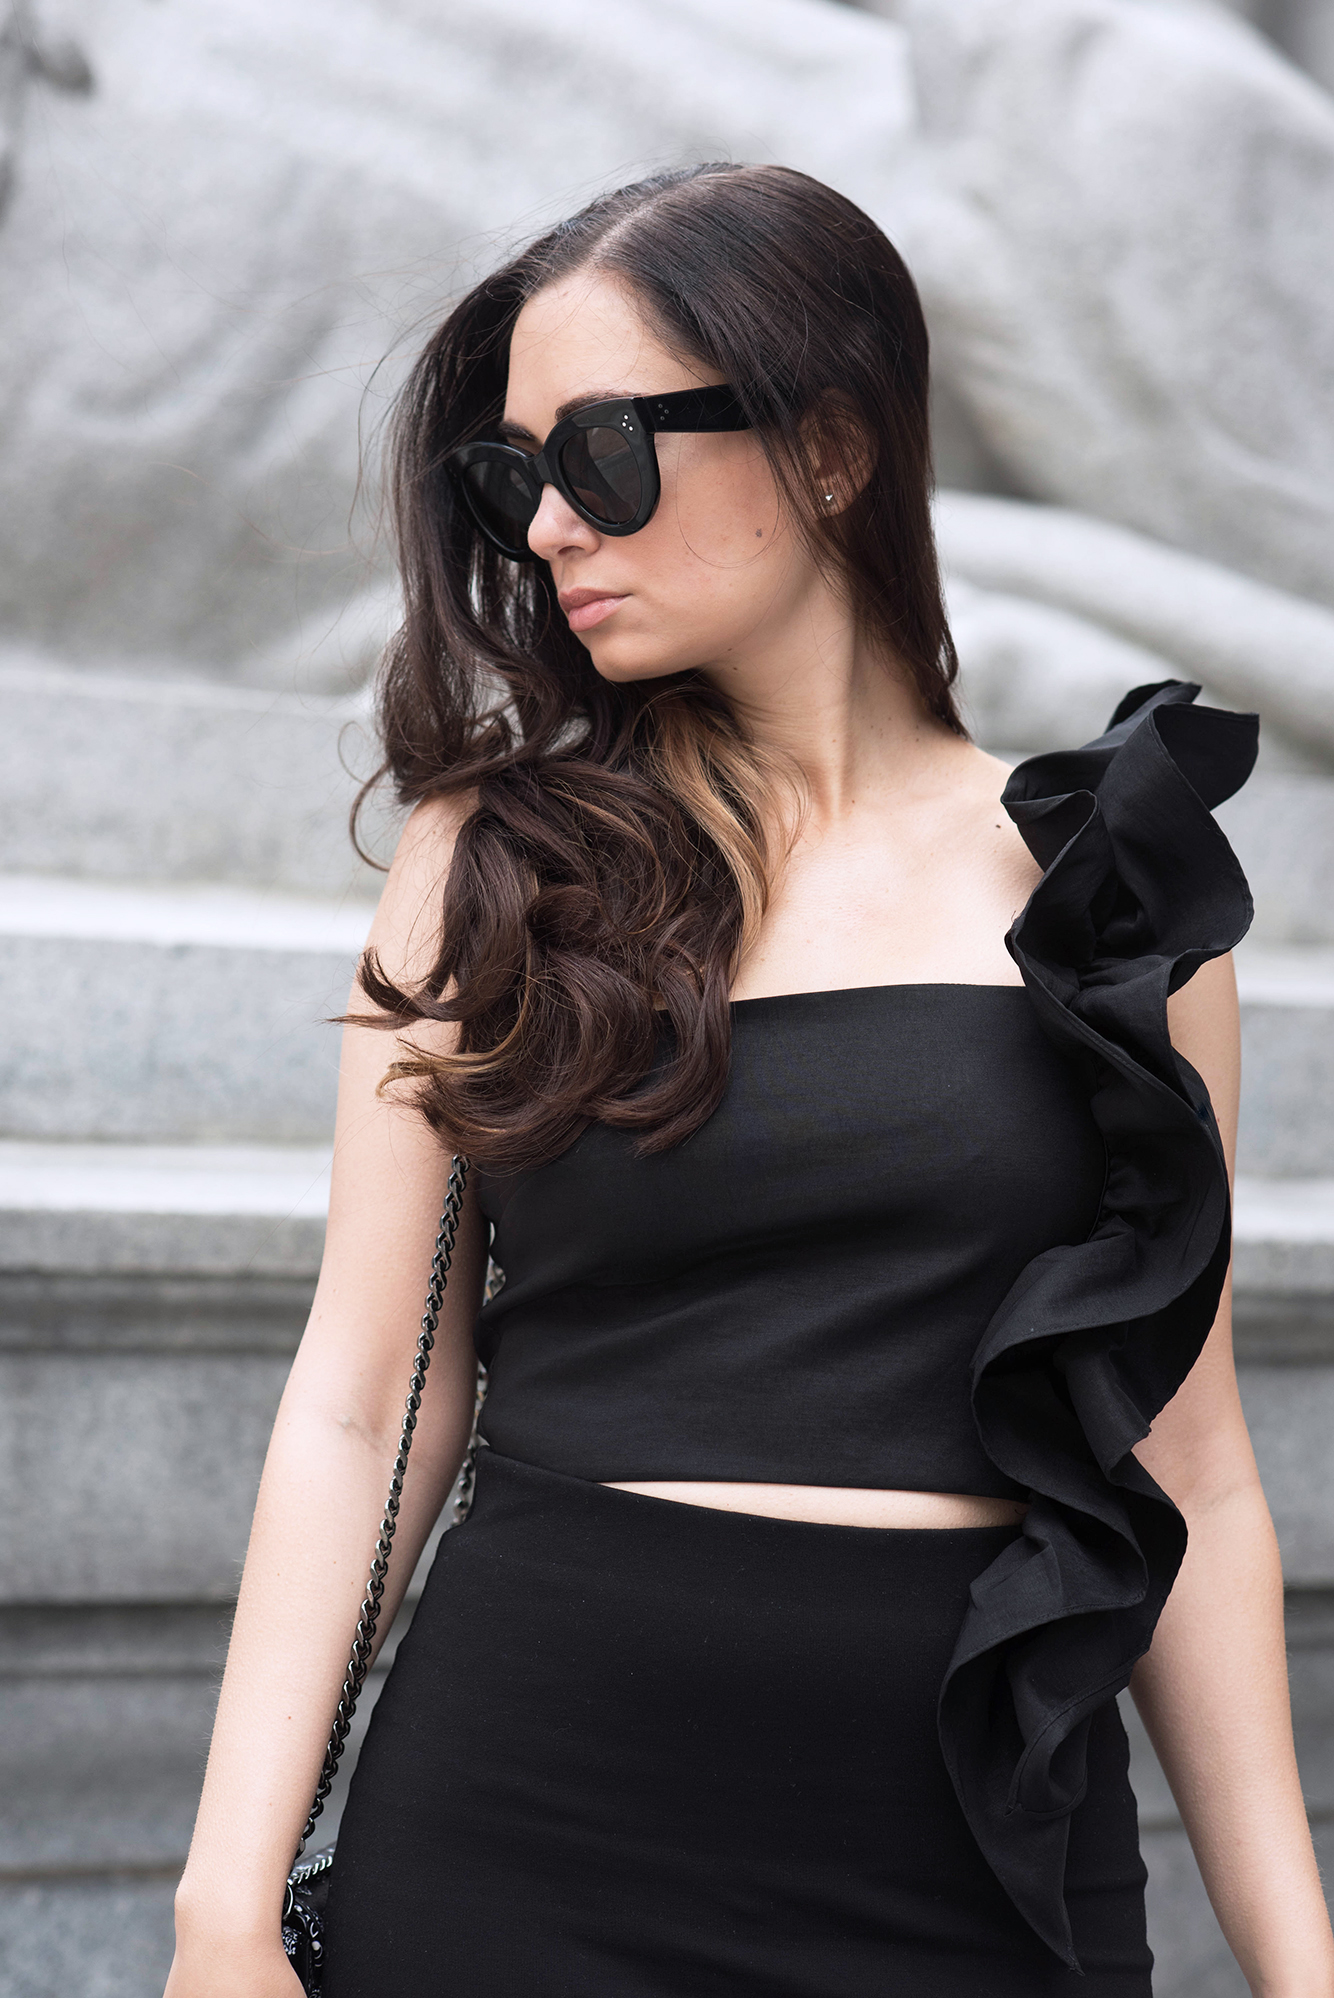 coco-and-vera-top-vancouver-style-blog-top-canadian-style-blog-top-blogger-portrait-cee-fardoe-brunette-circus-royalty-crop-top-celine-sunglasses copy